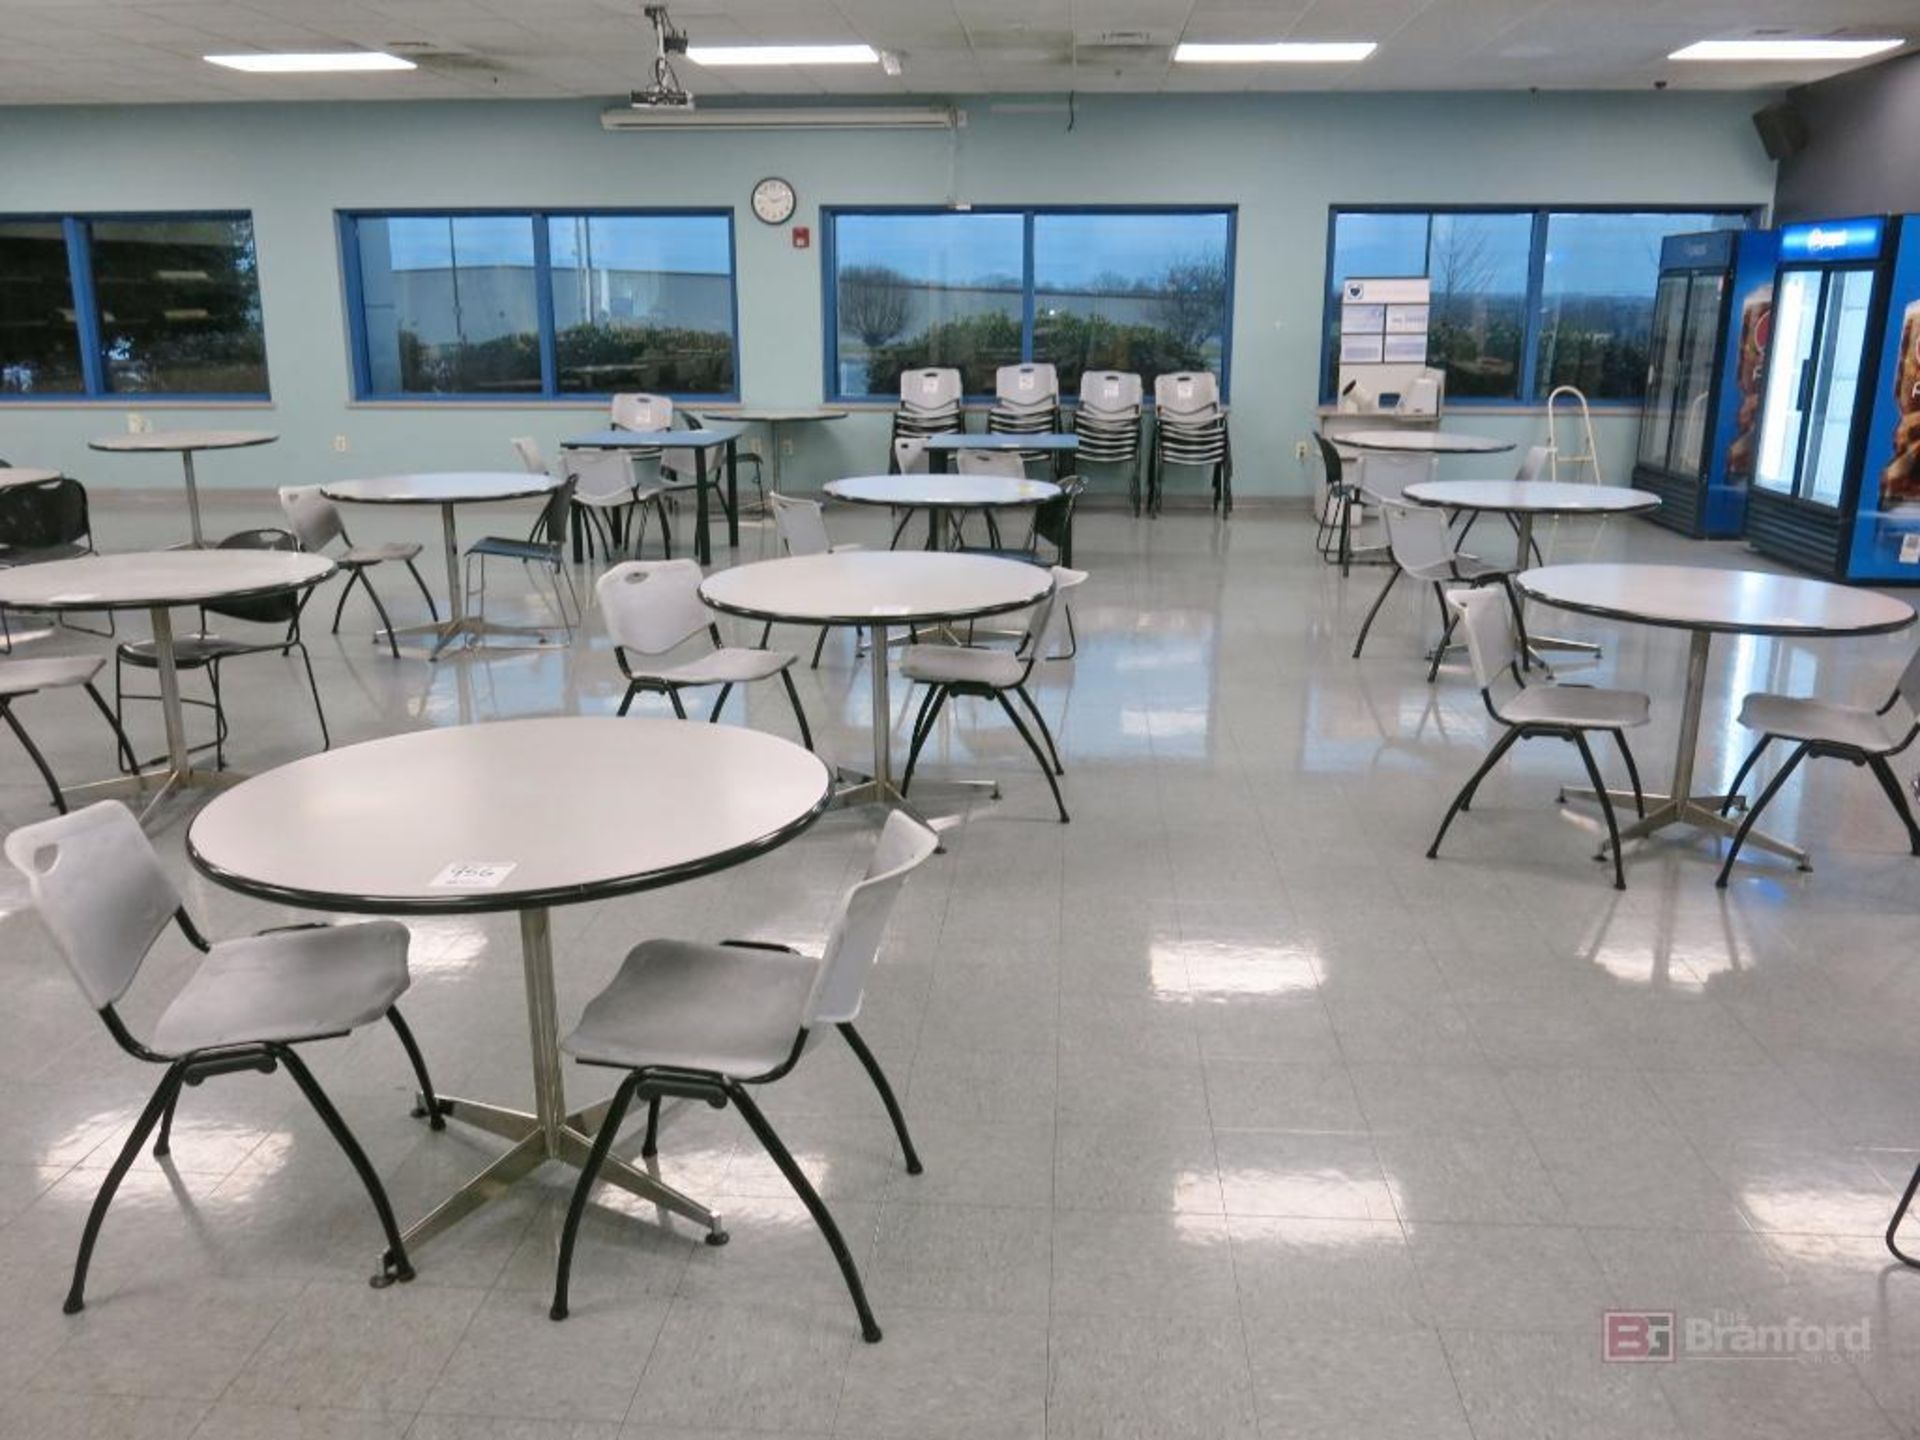 Lot of Approx. (20) Cafeteria Style Tables w/ Associated Chairs - Image 2 of 5